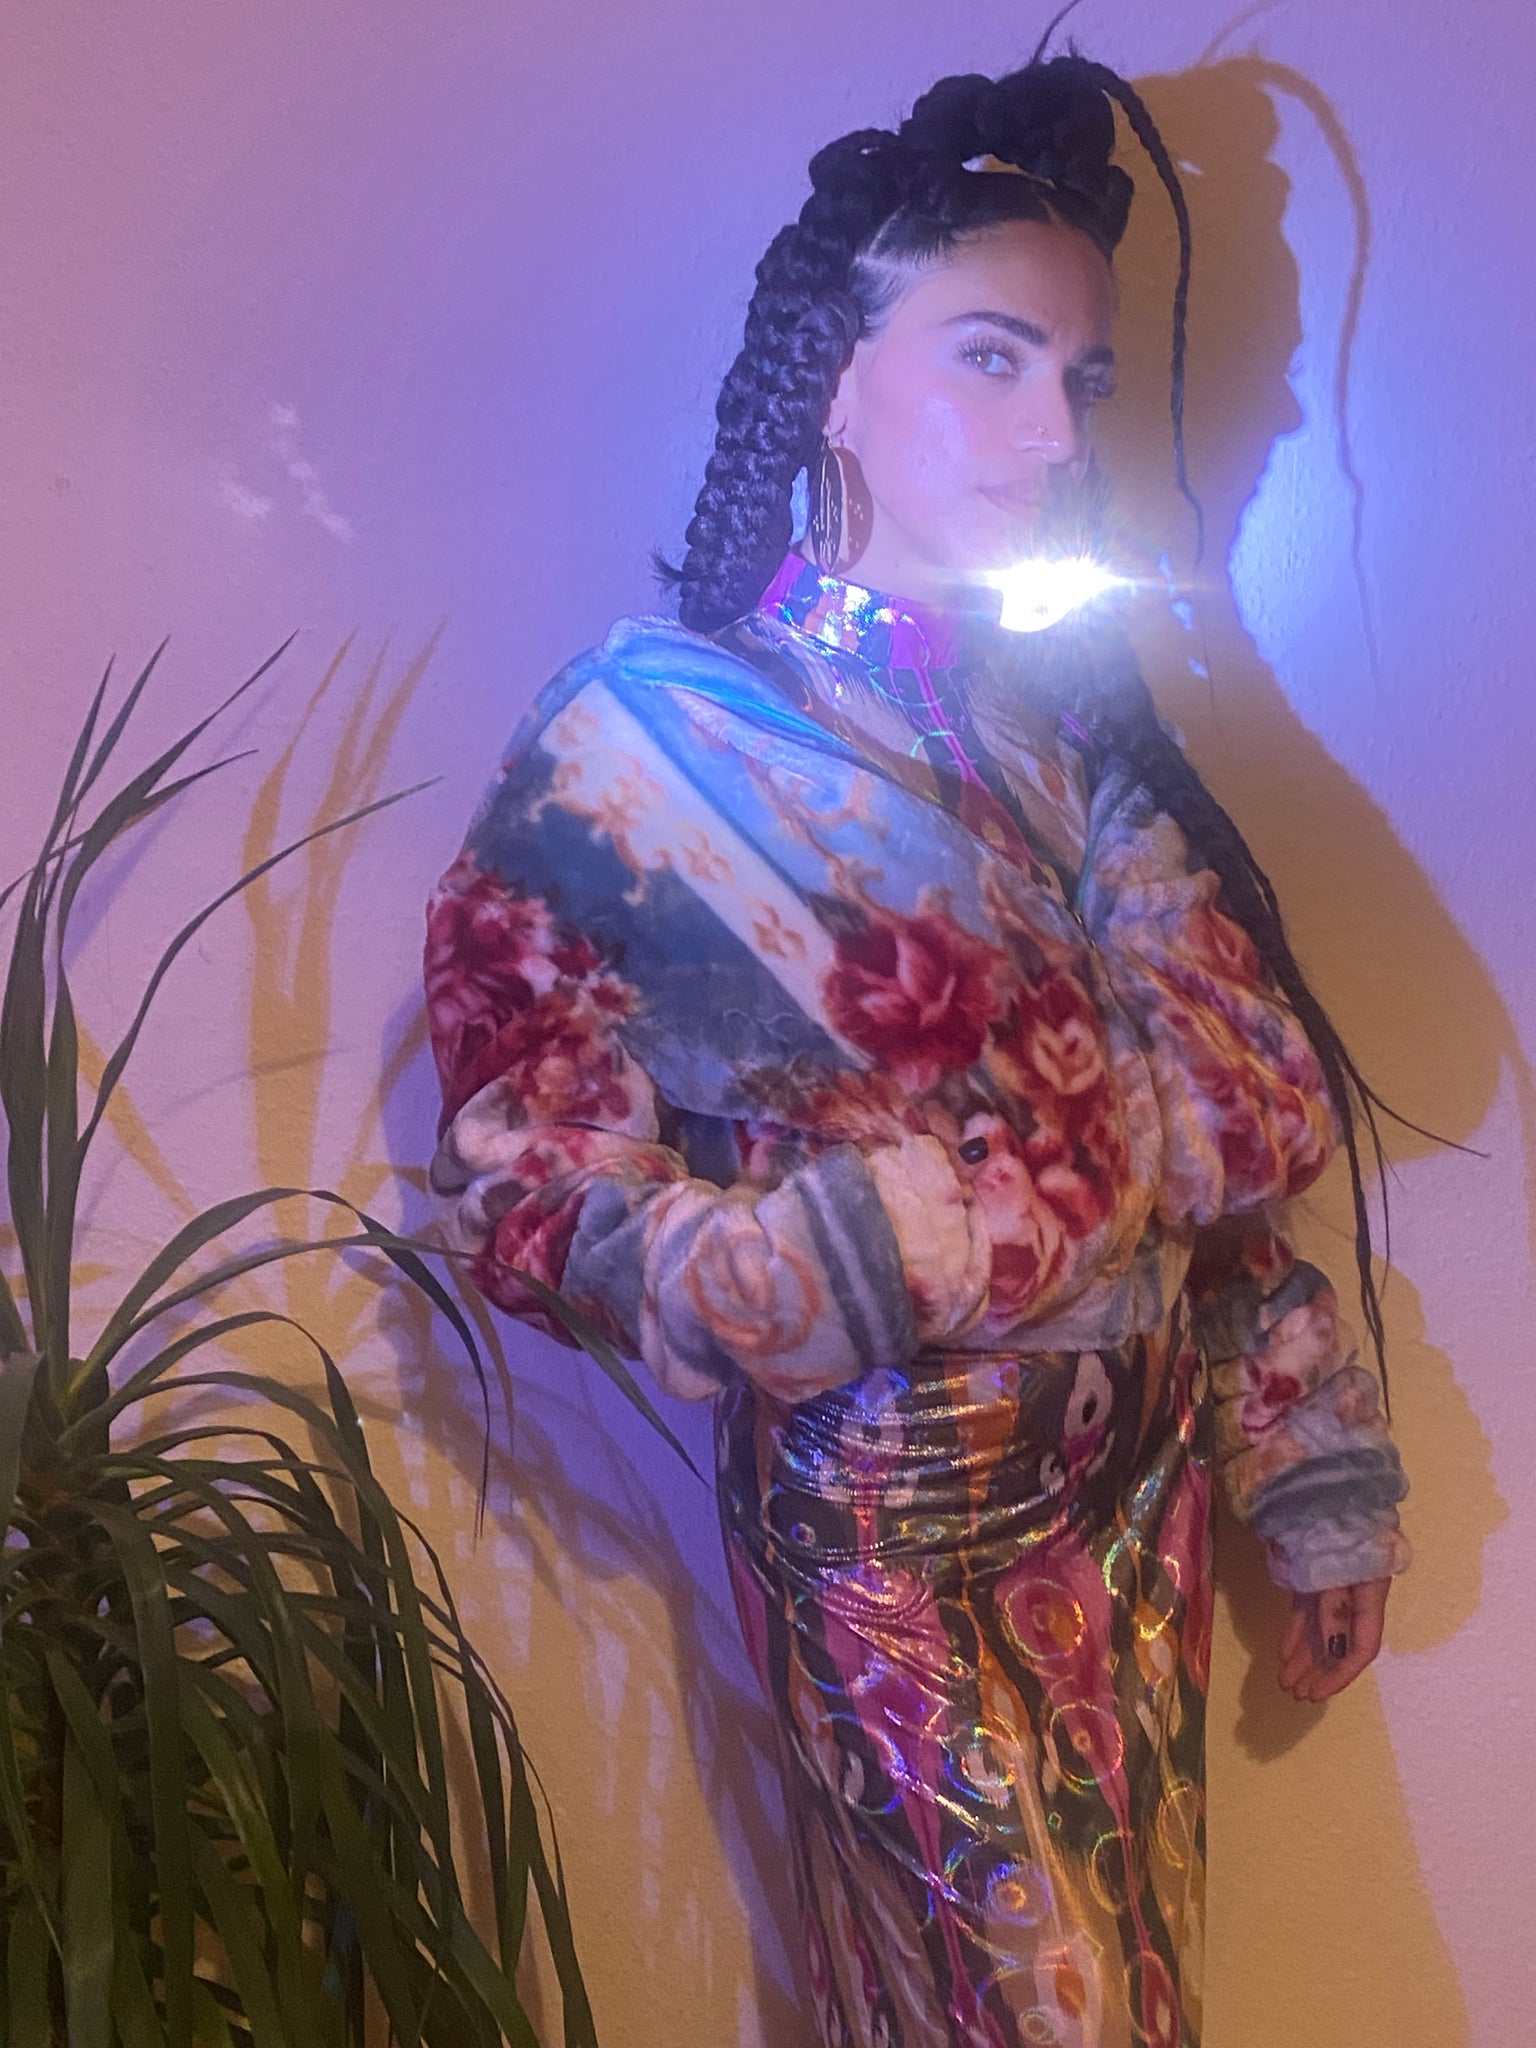 Woman with braids next to a plant wearing a shiny dress and a blanket jacket.